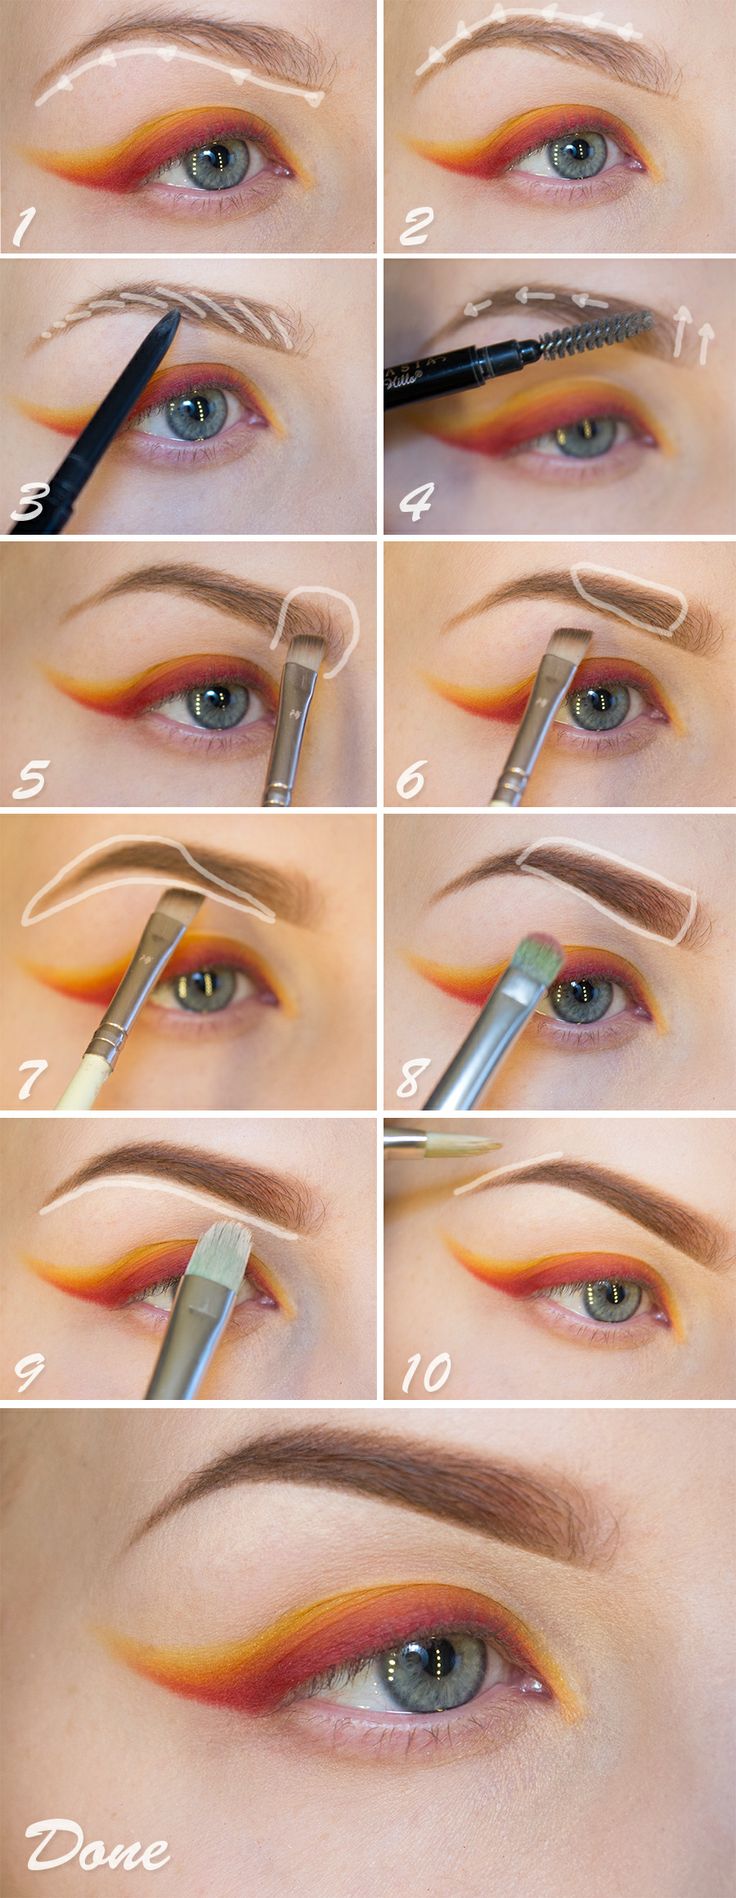 How to Make or Shape a perfect eyebrow? - how to how to get perfect eyebrow shape